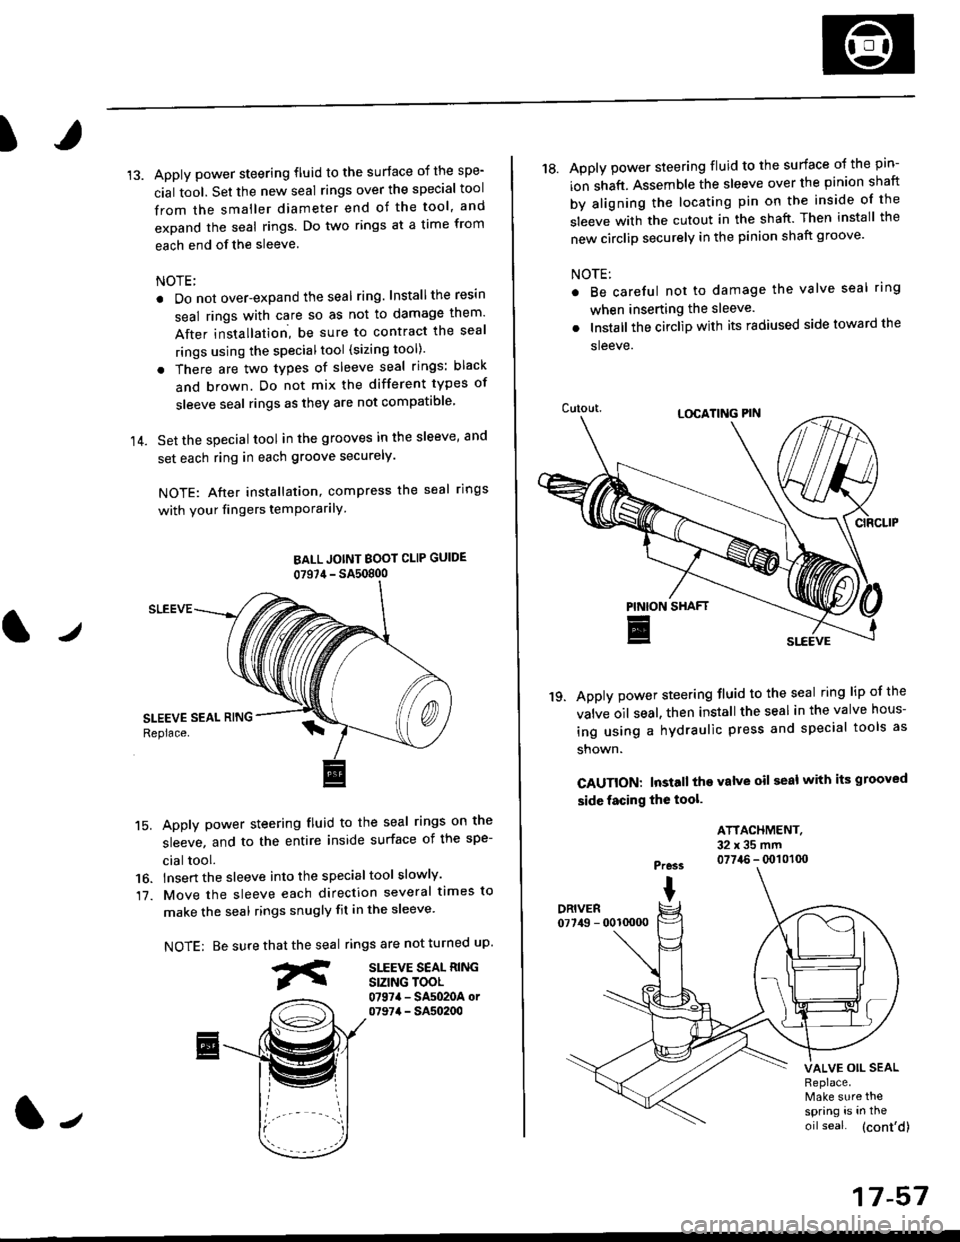 HONDA CIVIC 1998 6.G Workshop Manual I
14.
Apply power steering fluid to the surface of the spe-
cial tool. Set the new seal rings over the special tool
from the smaller diameter end of the tool, and
expand the seal rings. Do two rings a